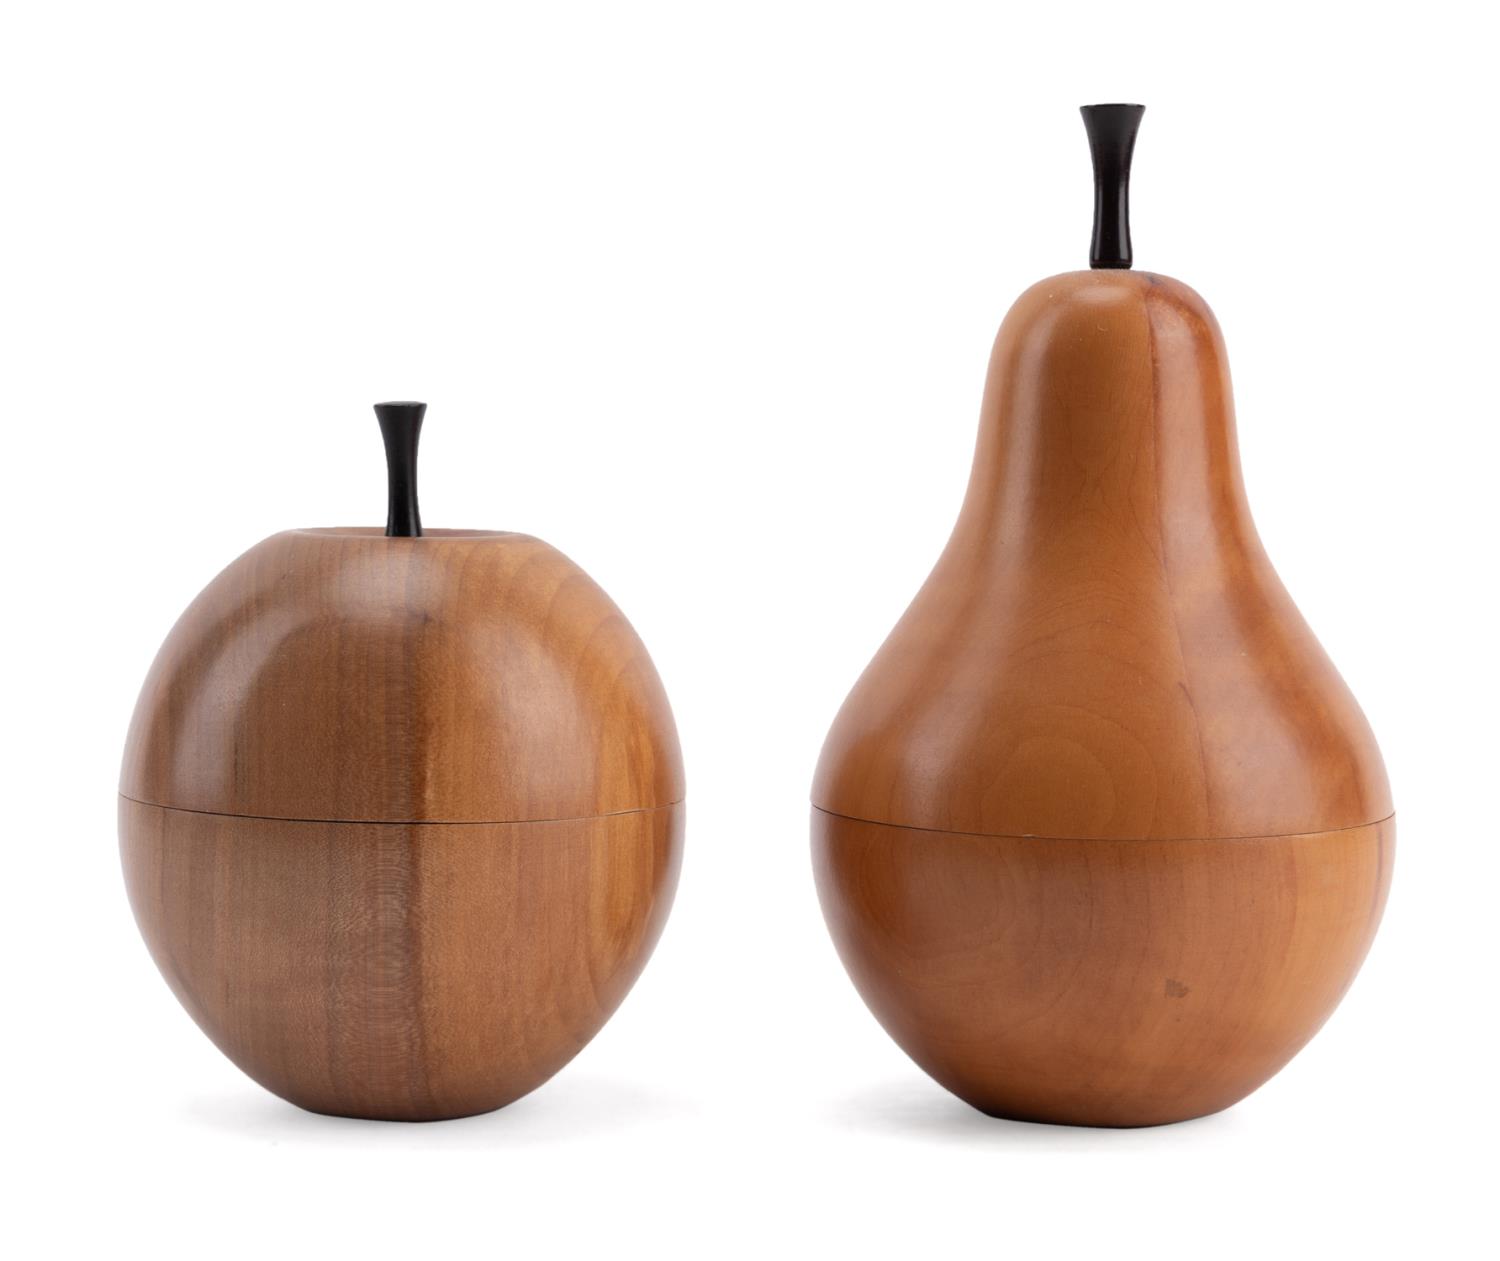 TWO LINLEY APPLE AND PEAR WOODEN 3b40a2